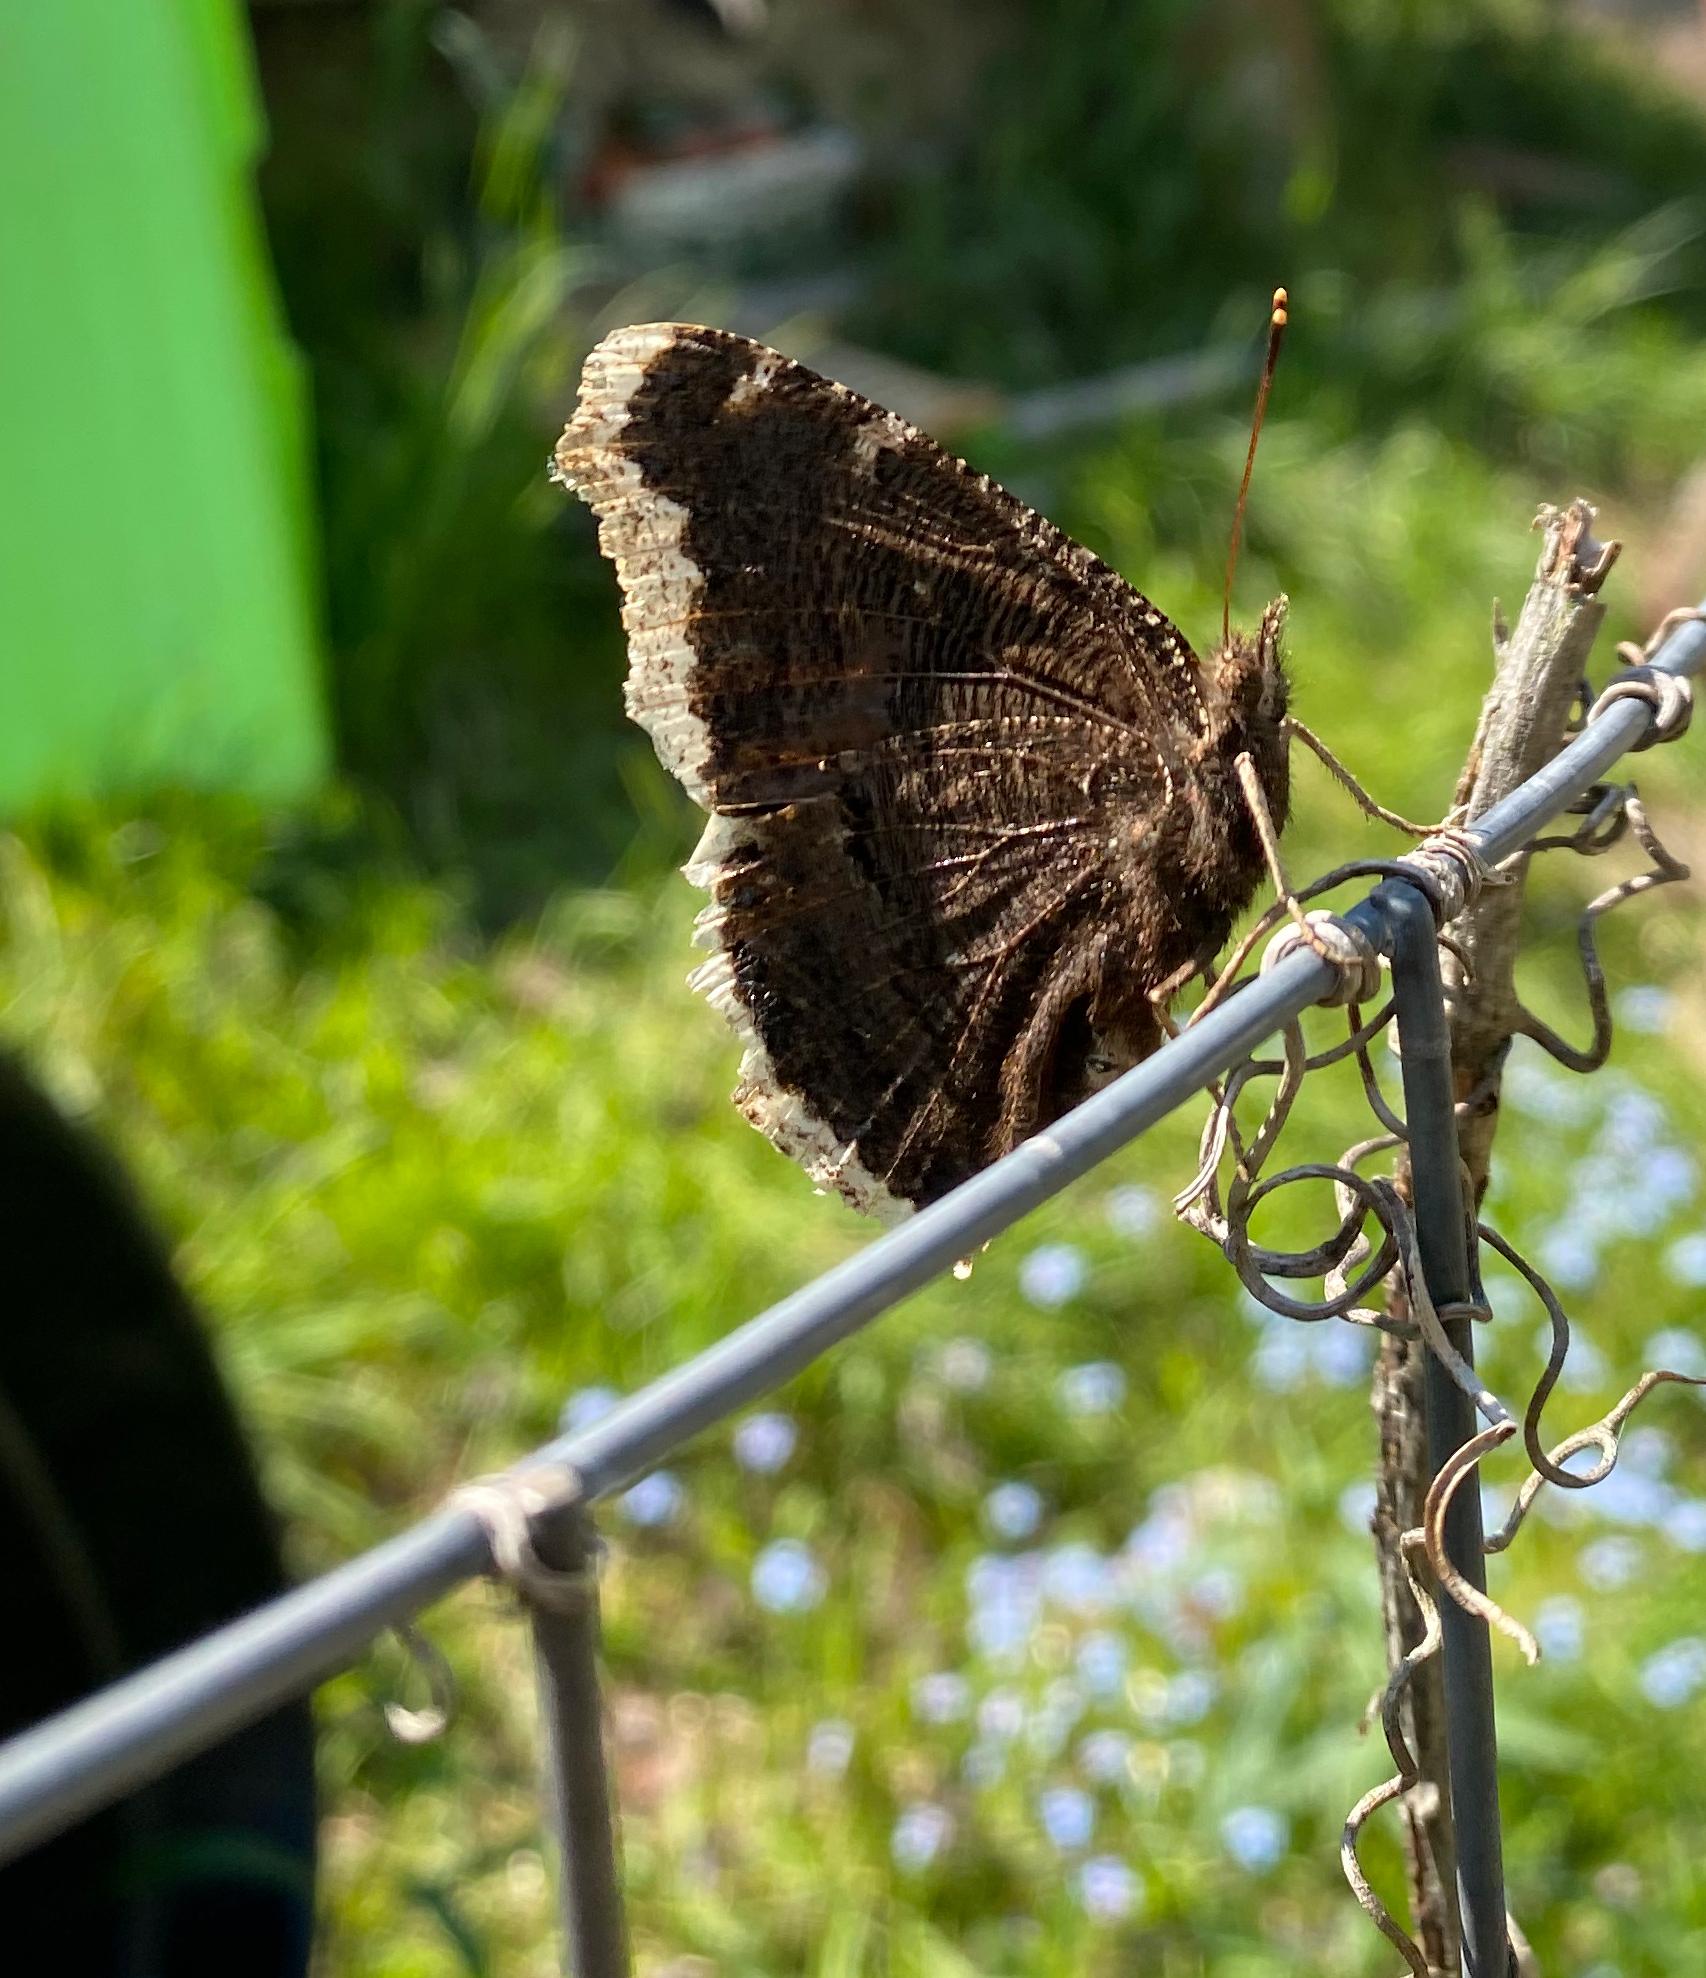 A mourning cloak butterfly on a chain link fence.